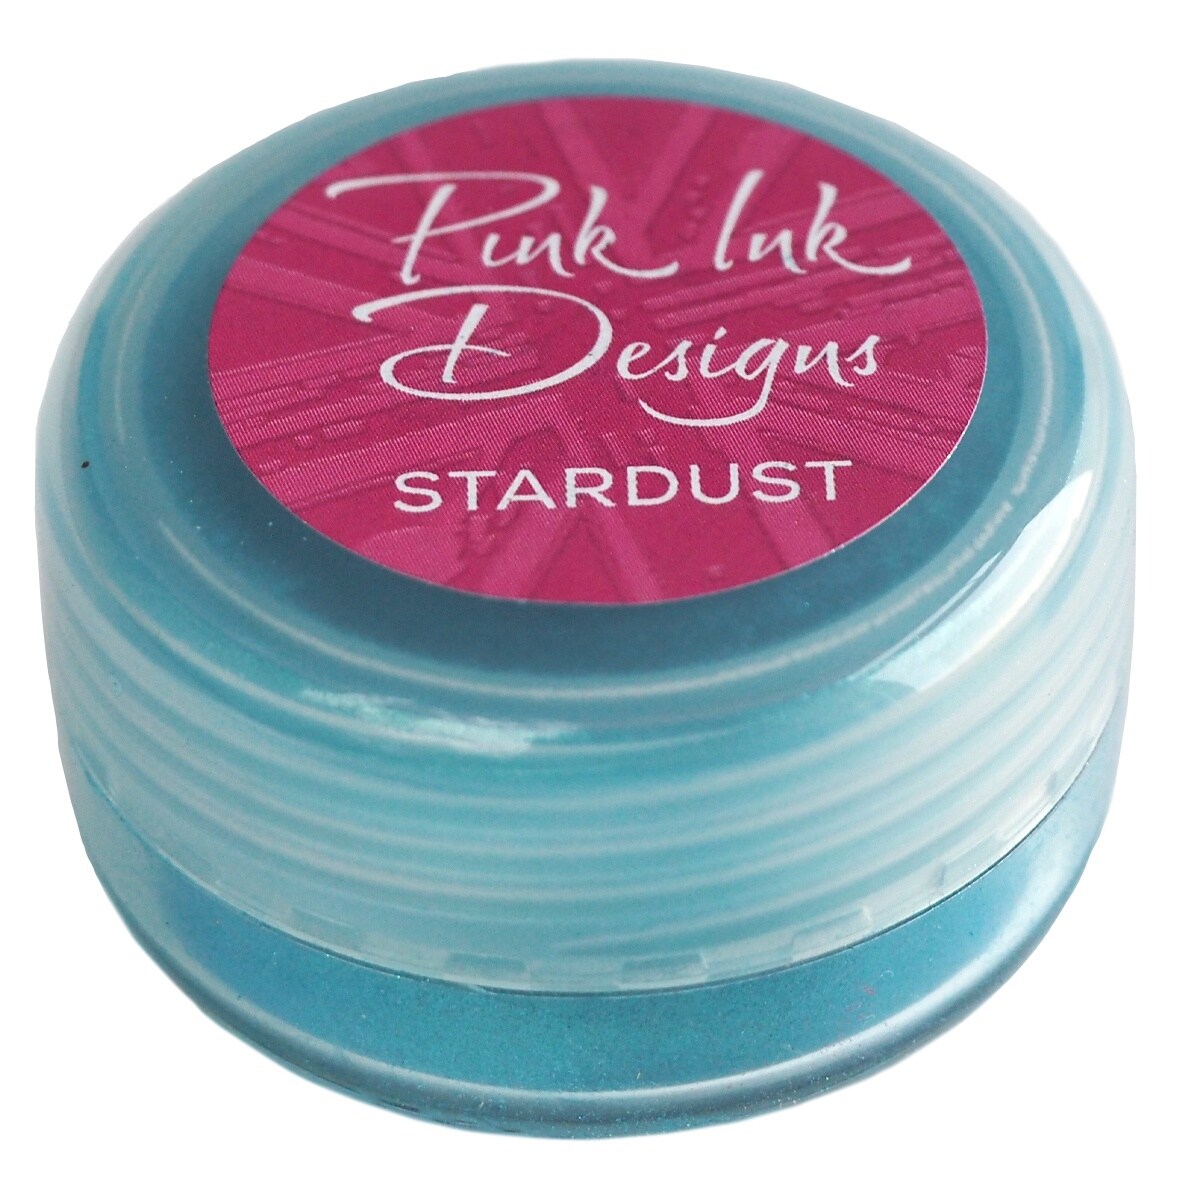 Pink Ink Designs Stardust 10ml-Turquoise Waters